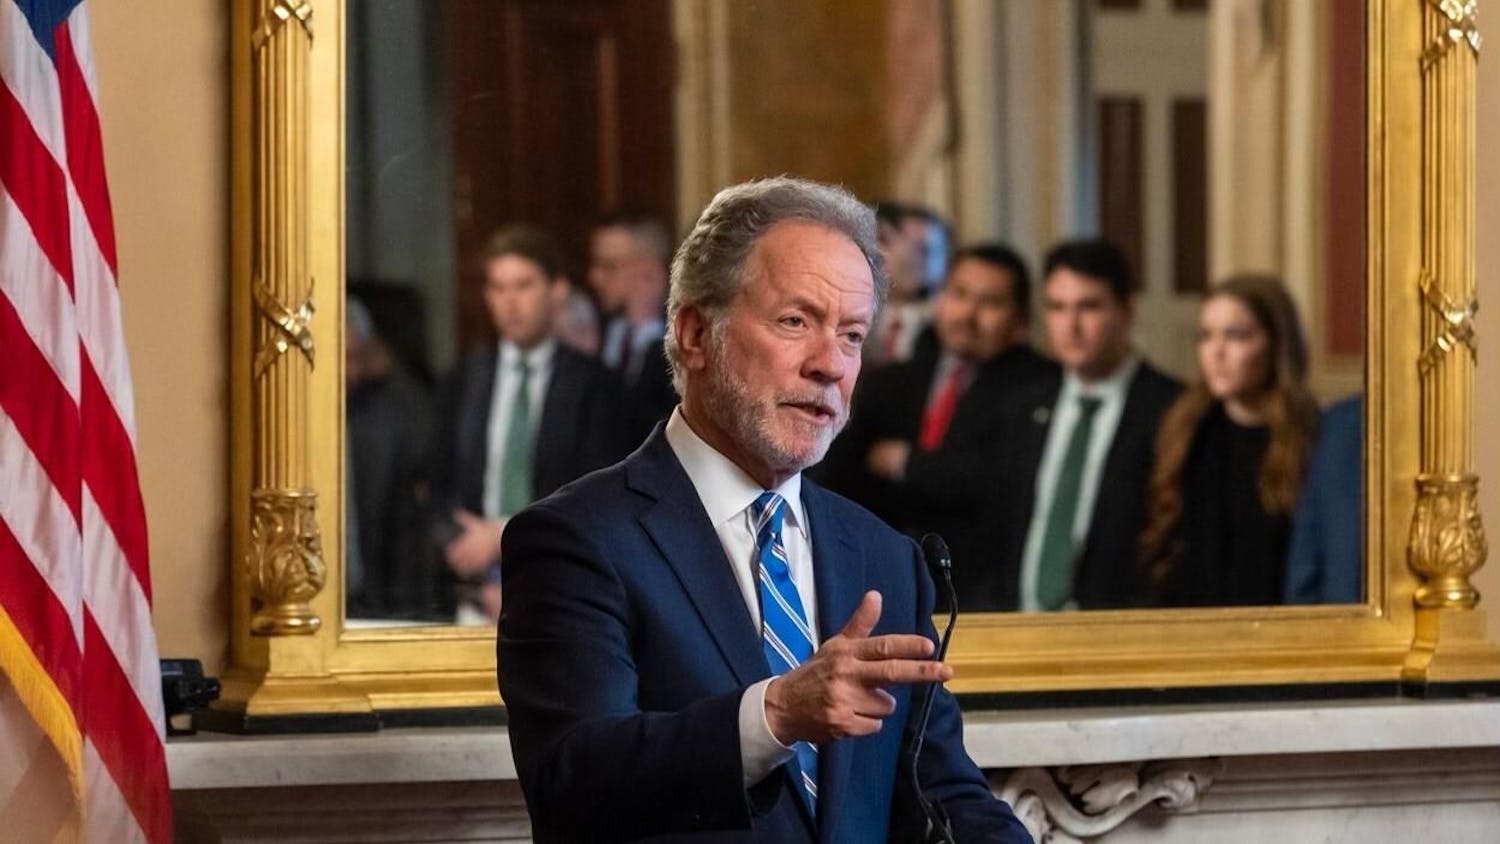 Former South Carolina Gov. David Beasley at the South Carolina Statehouse in Columbia, South Carolina. Beasley joined the  Joseph F. Rice School of Law on March 1 as a faculty professor in the Department of Legal Studies.